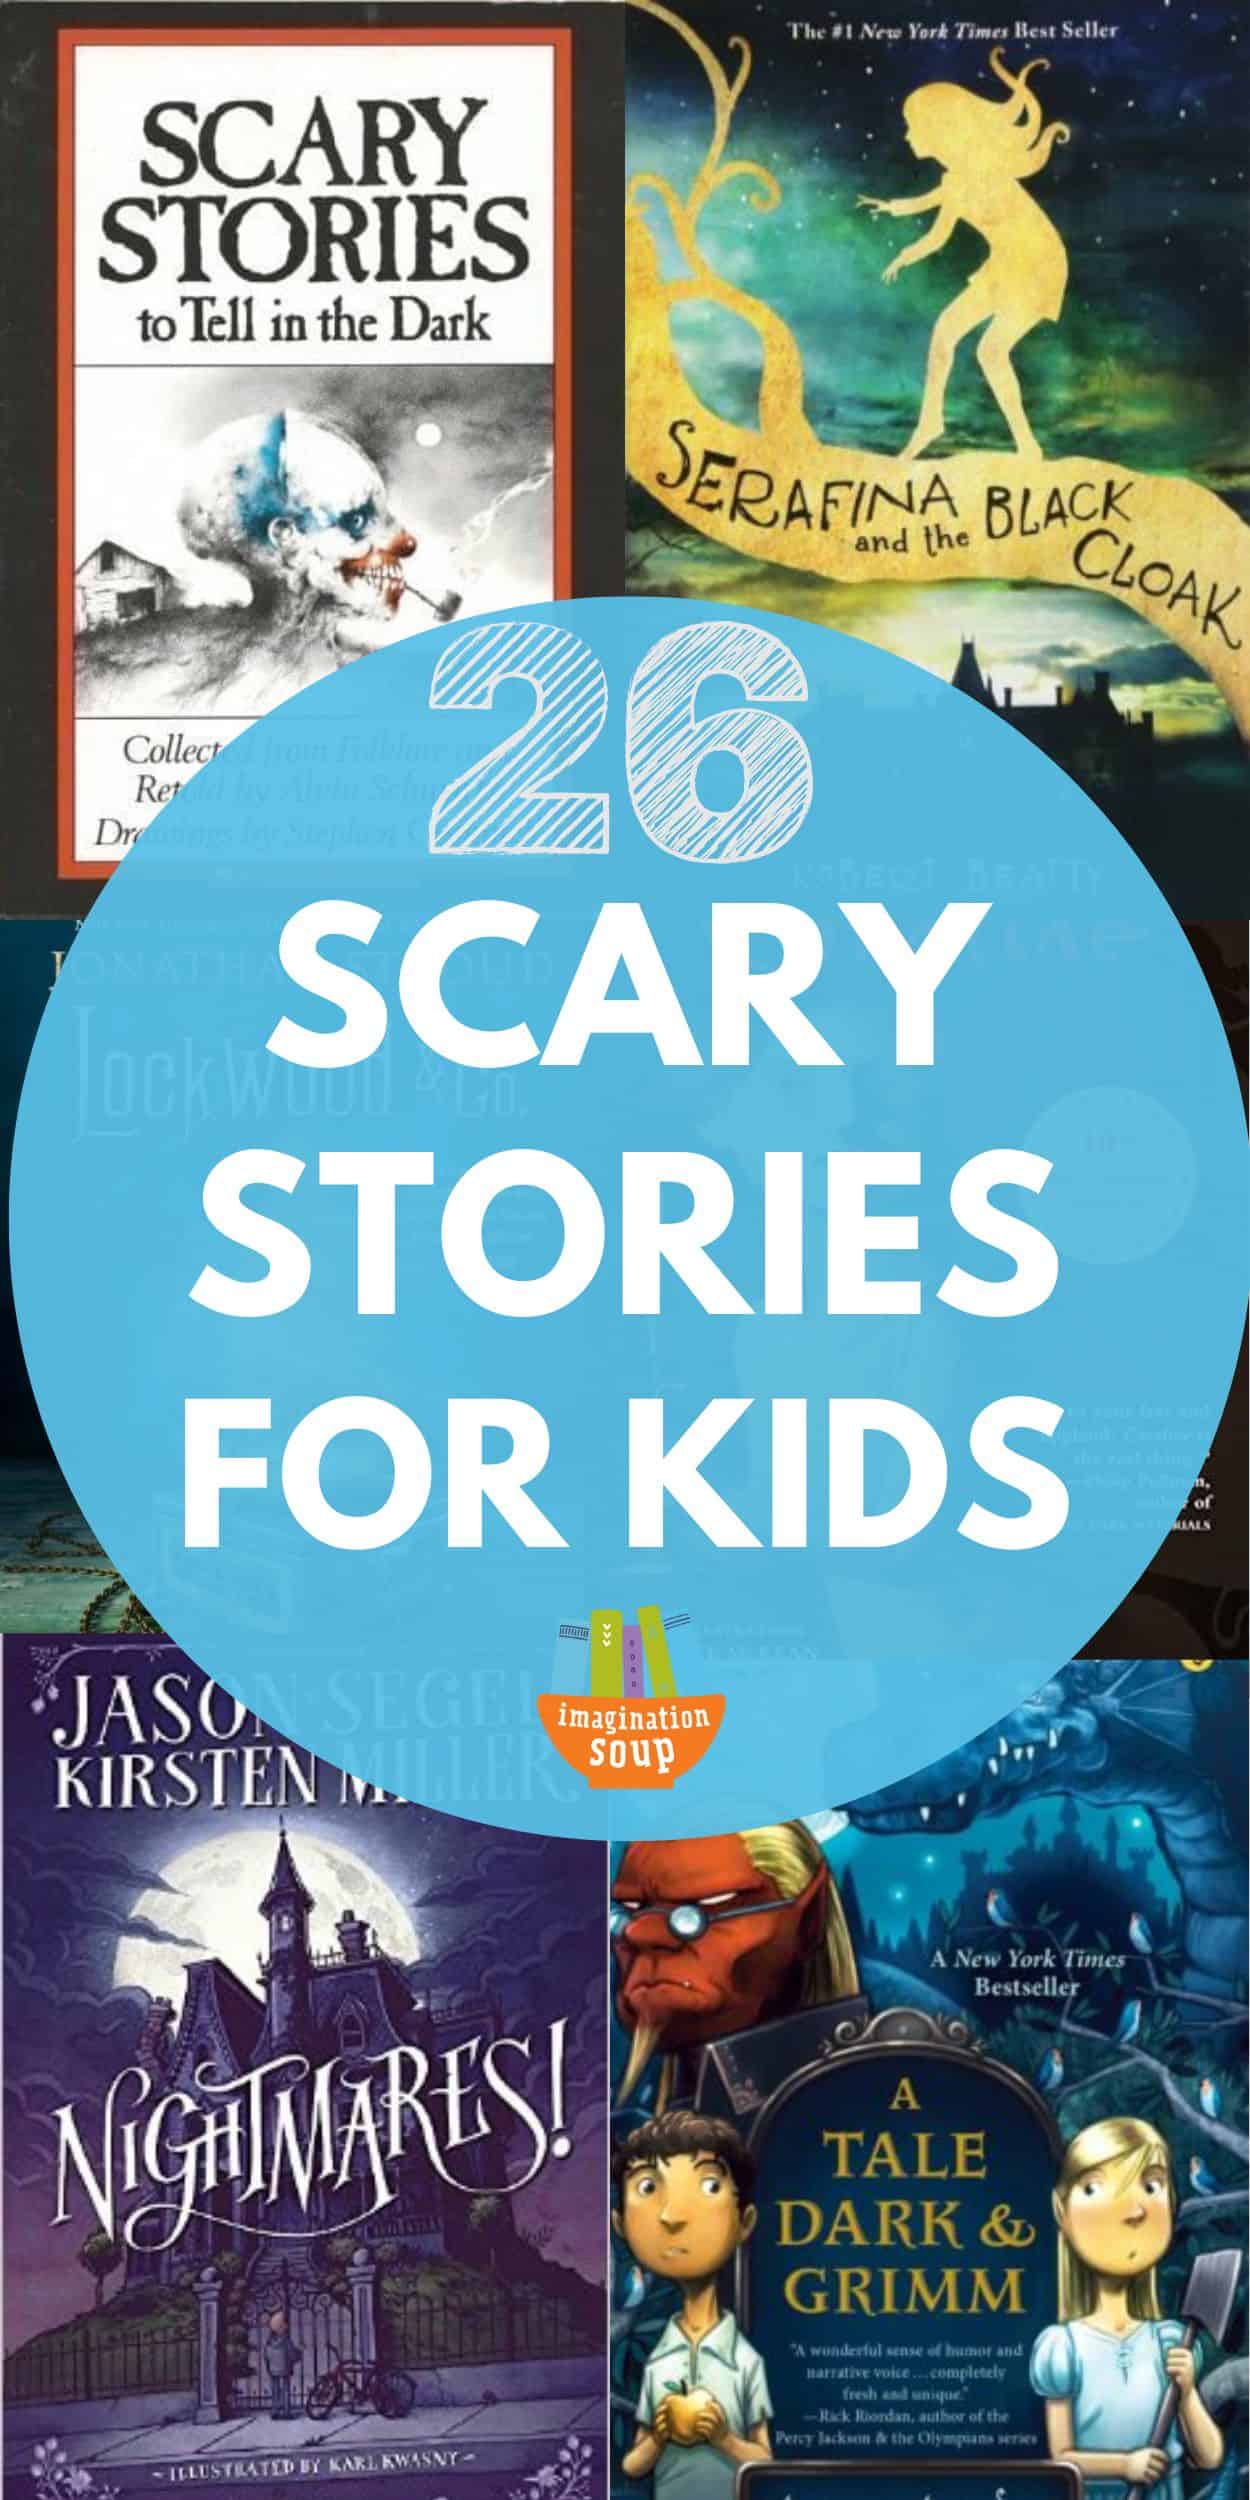 Creepy, spooky, and scary stories are many kids' favorite kinds of books to read. If your readers love a good jolt of adrenaline, these scary stories will give readers a spooky or frightful reading experience. Luckily, most of these book choices are only moderately scary instead of downright terrifying. 